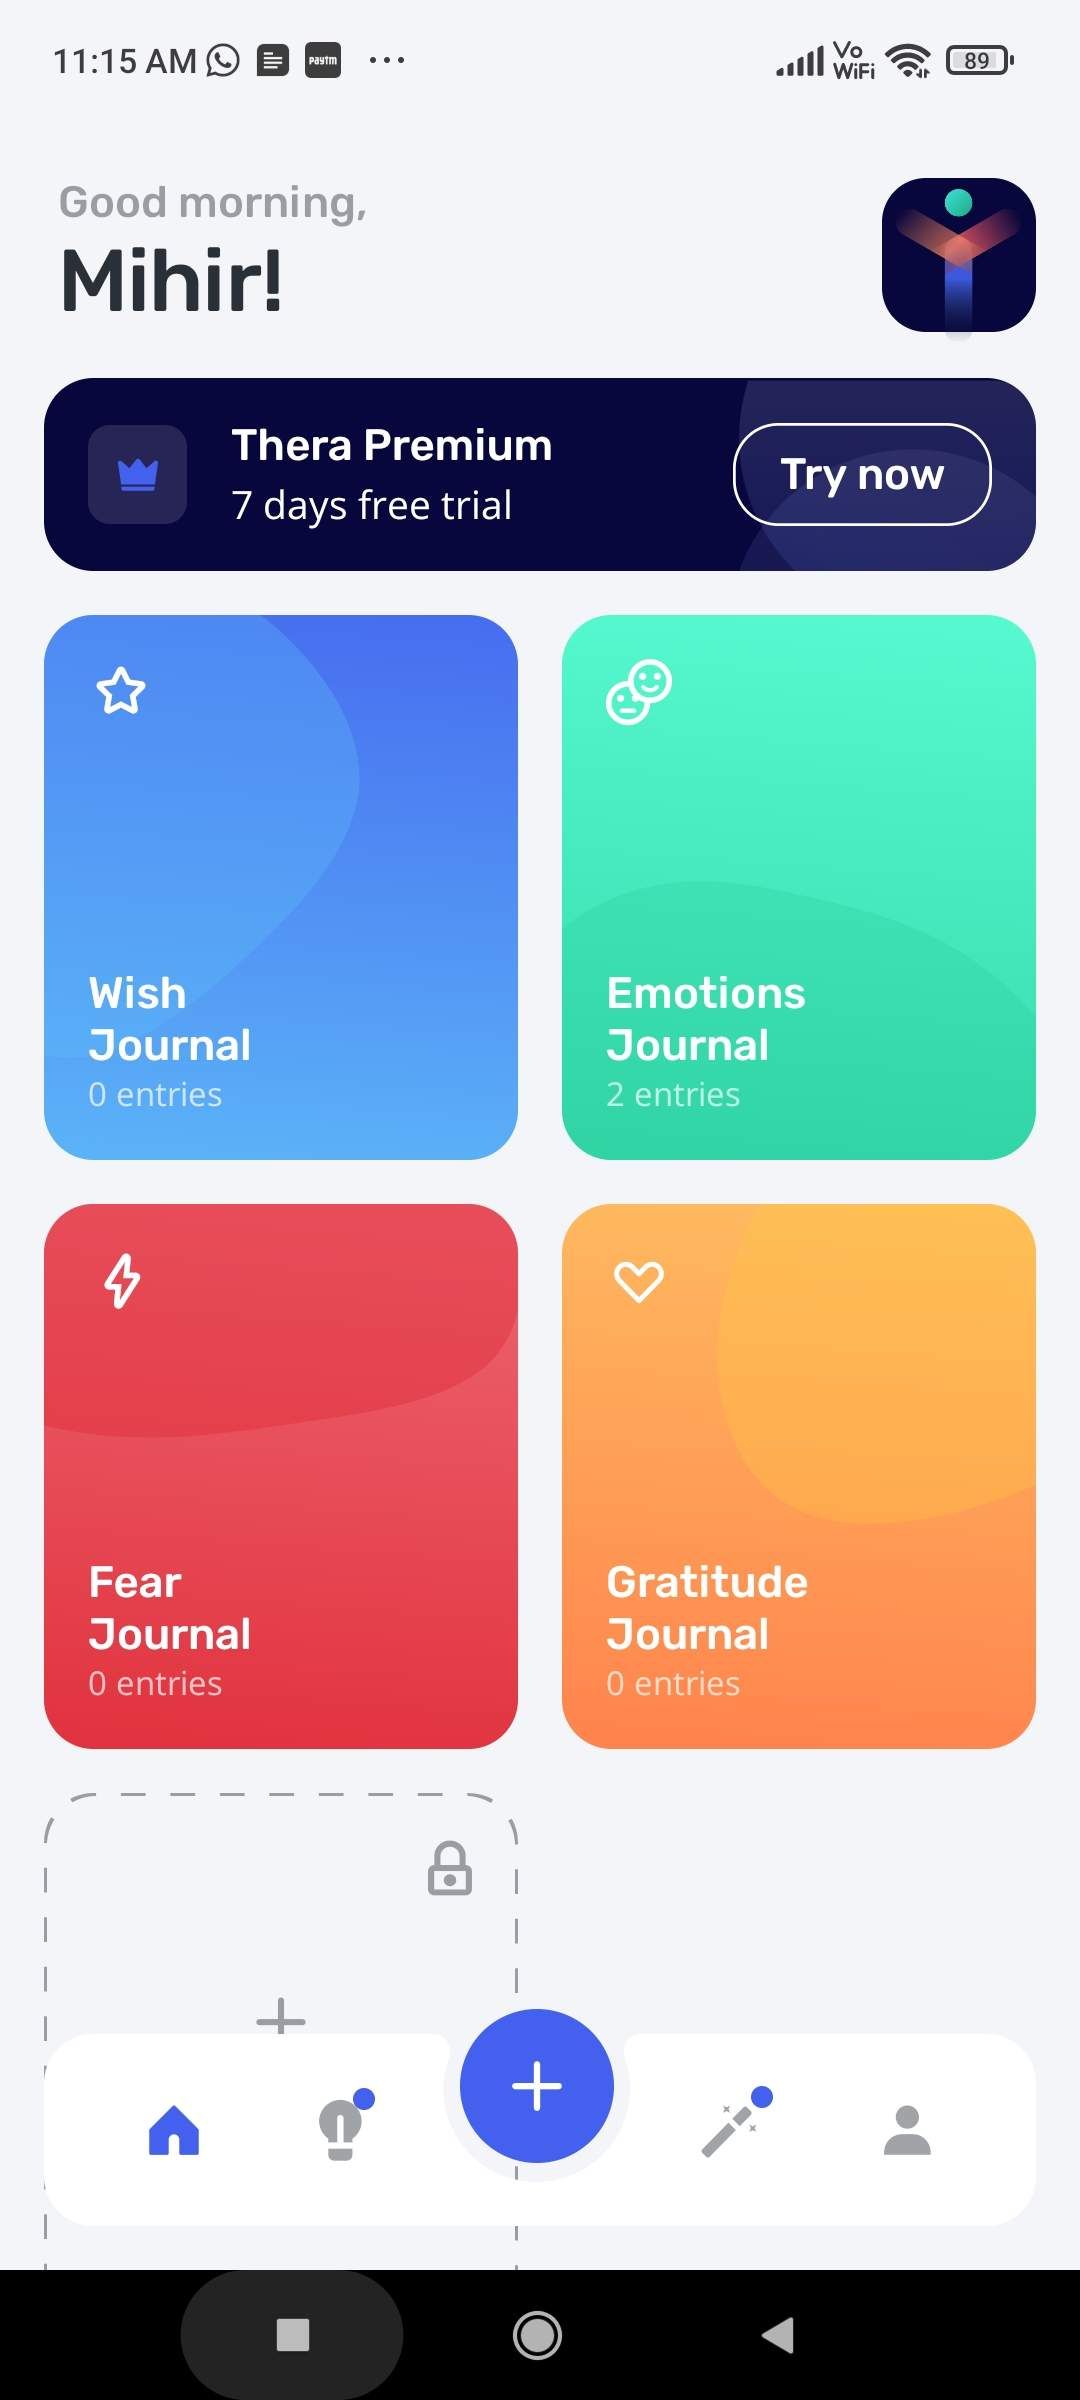 Thera has four journals within the app to chronicle different feelings and thoughts: emotions, wish, fear, and gratitude